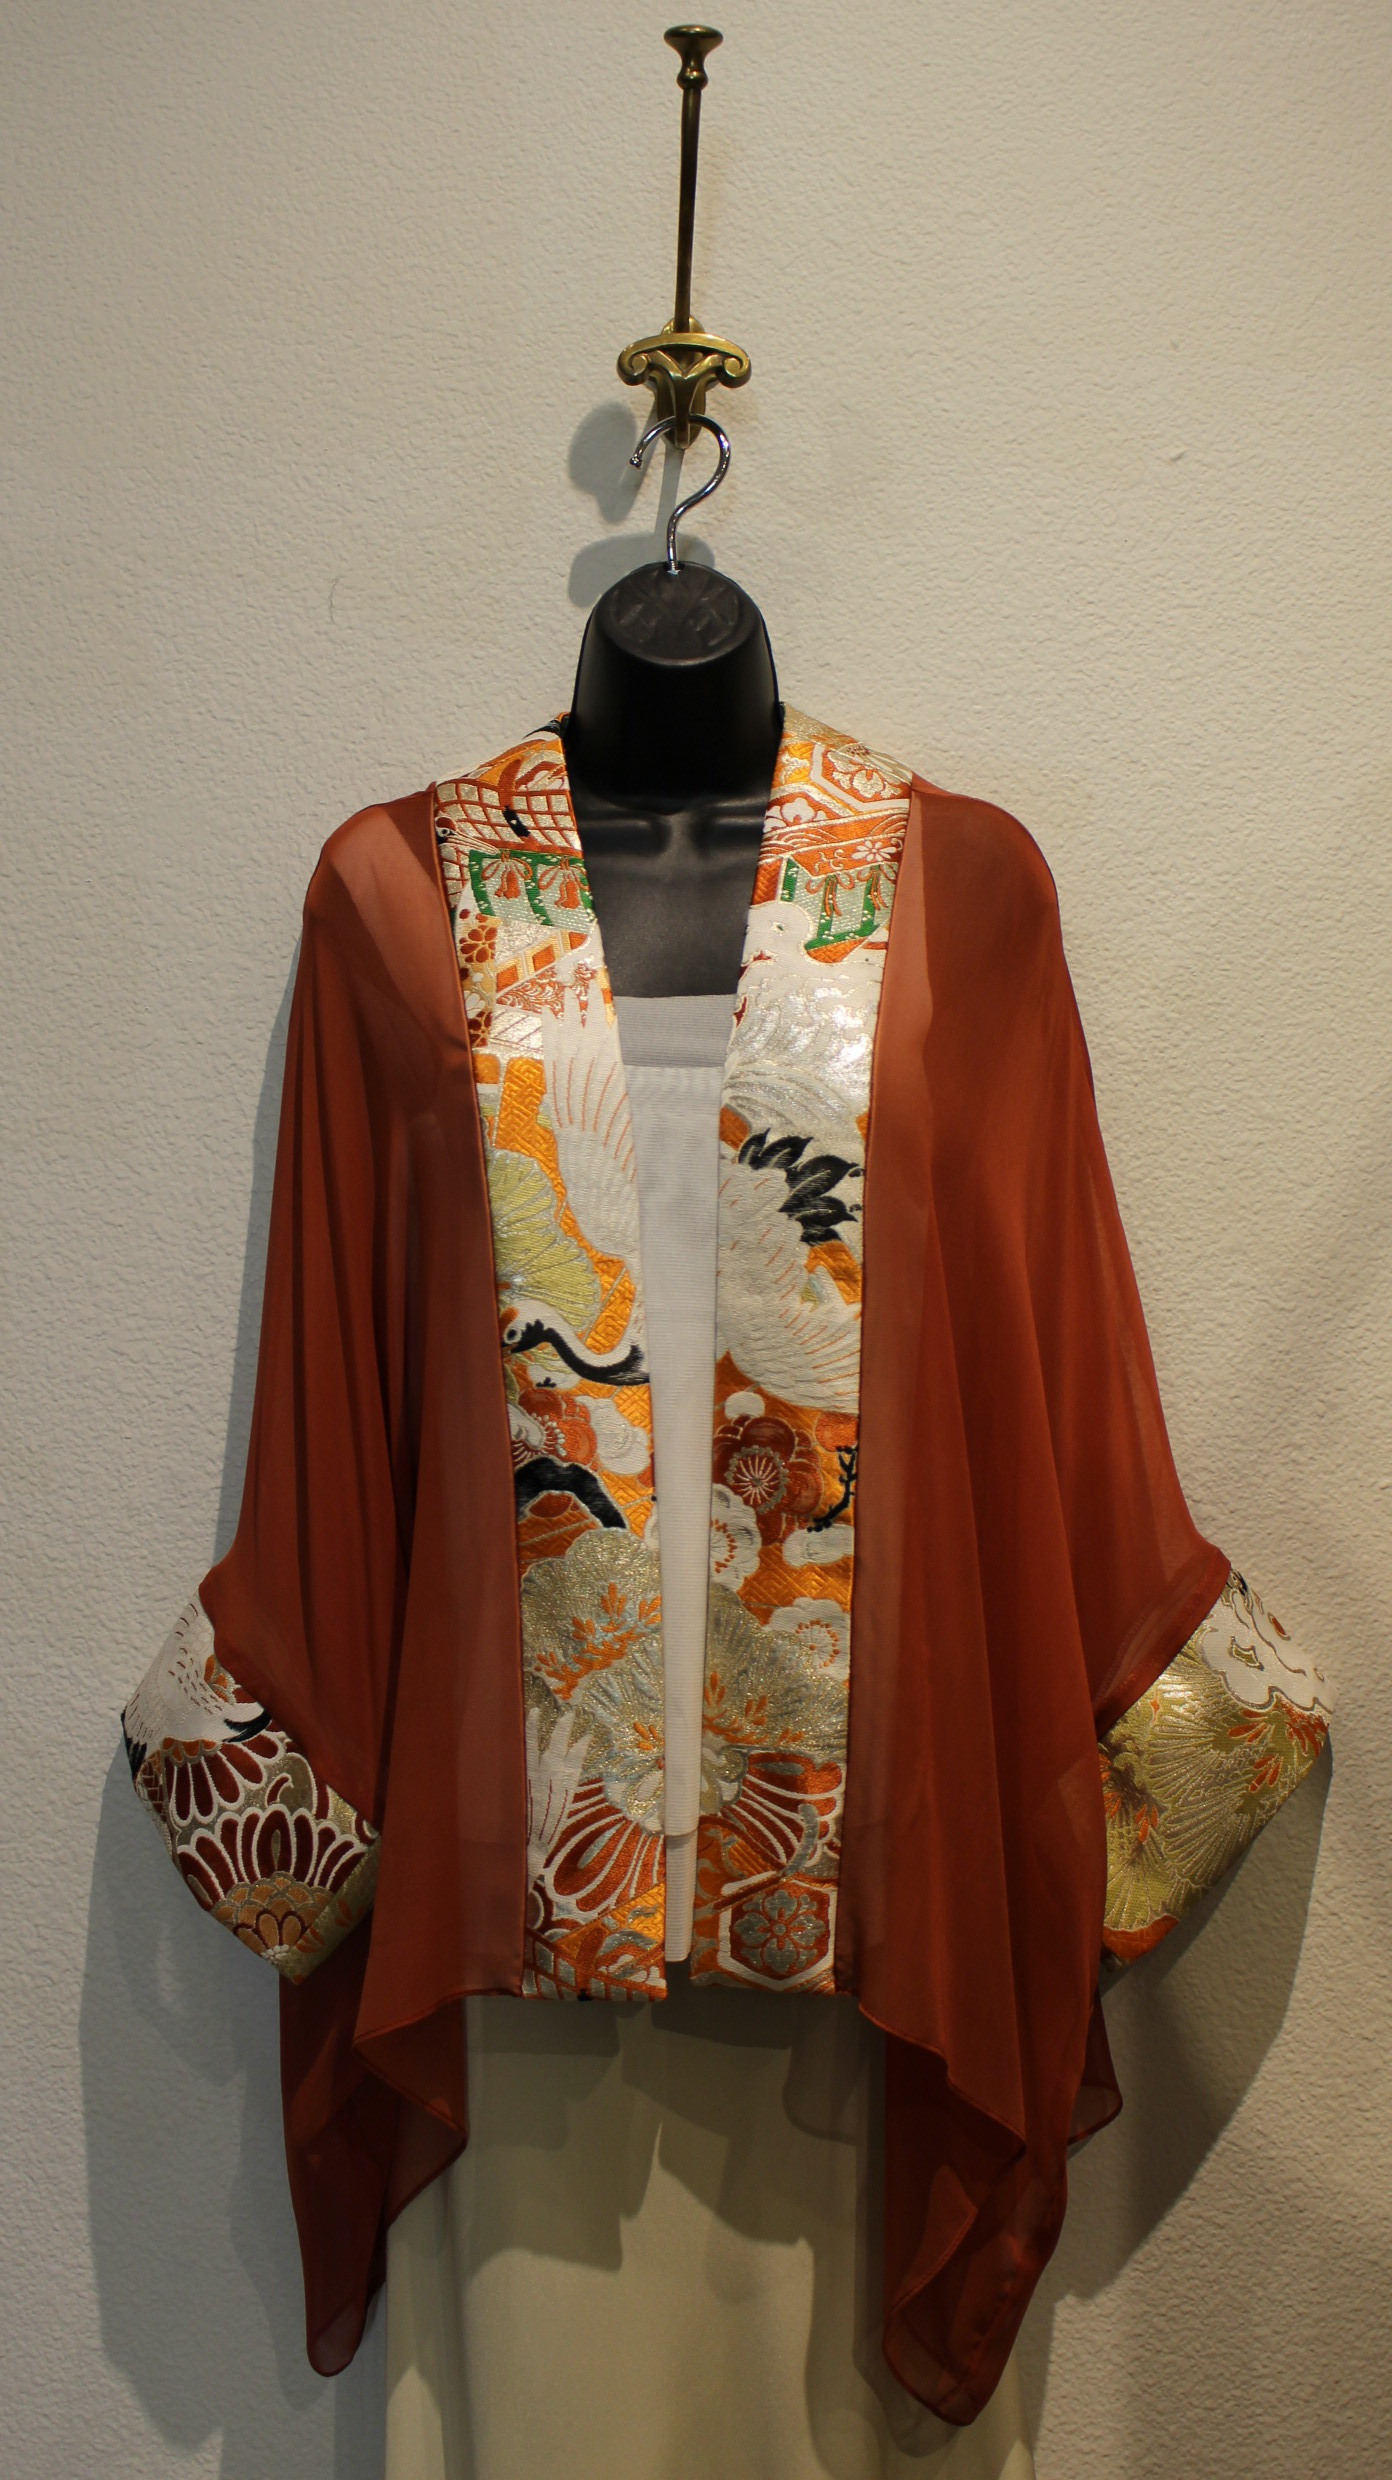 Sri  A Length of Twined Silk Rope: Recycled 19th Century Kimono